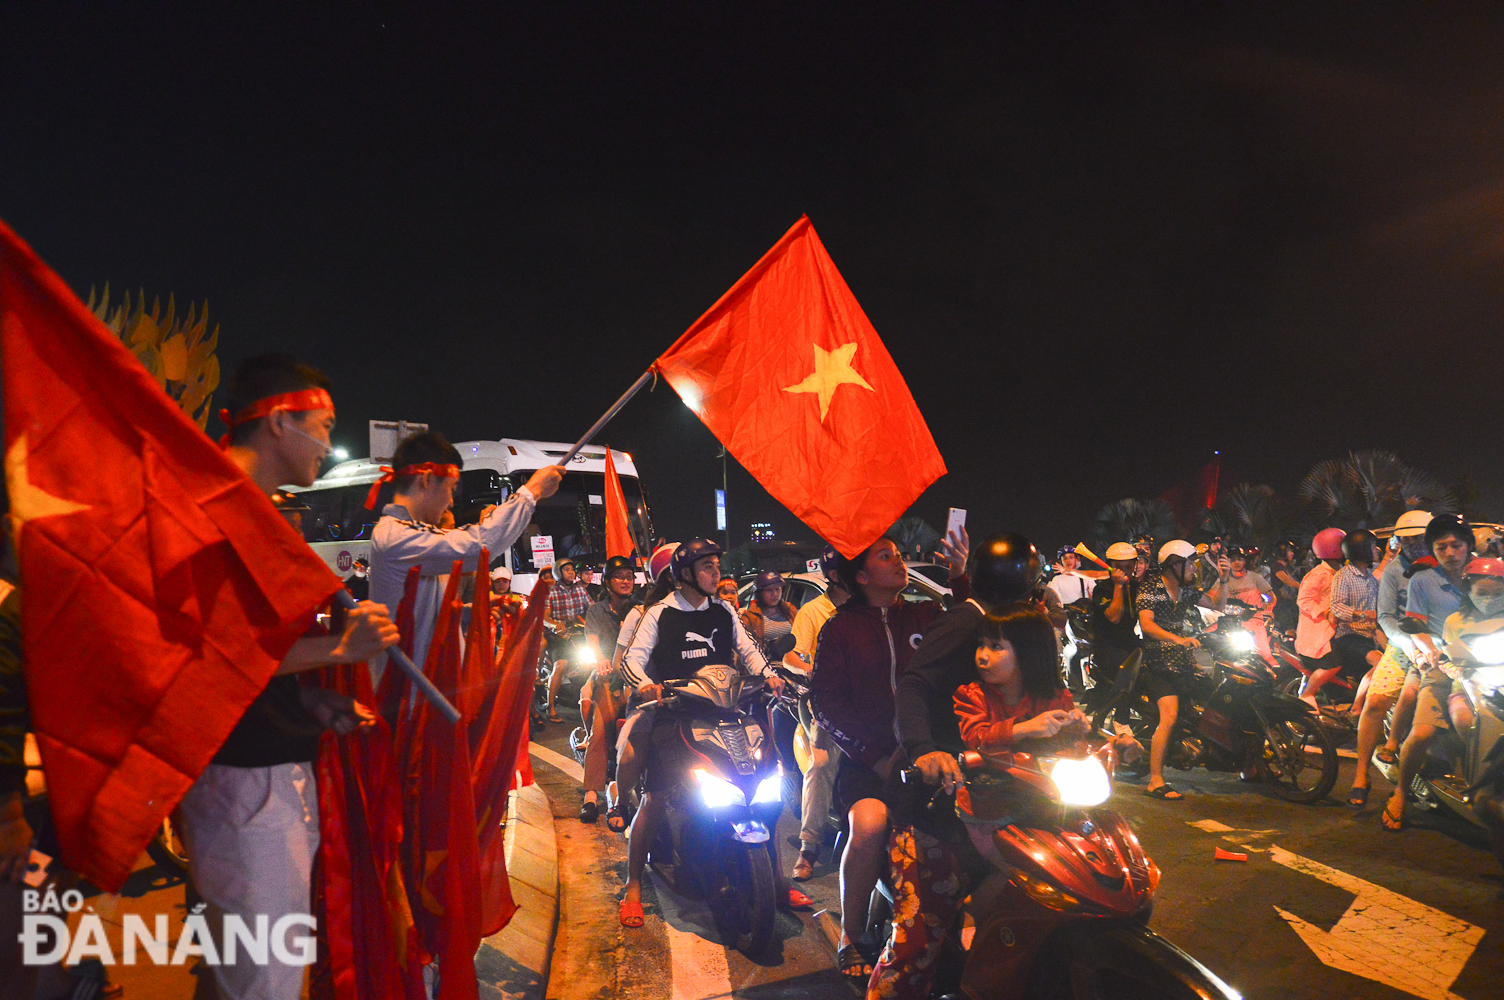 Fans enjoying a sleepless night following Viet Nam’s dramatic win over the Philippines.